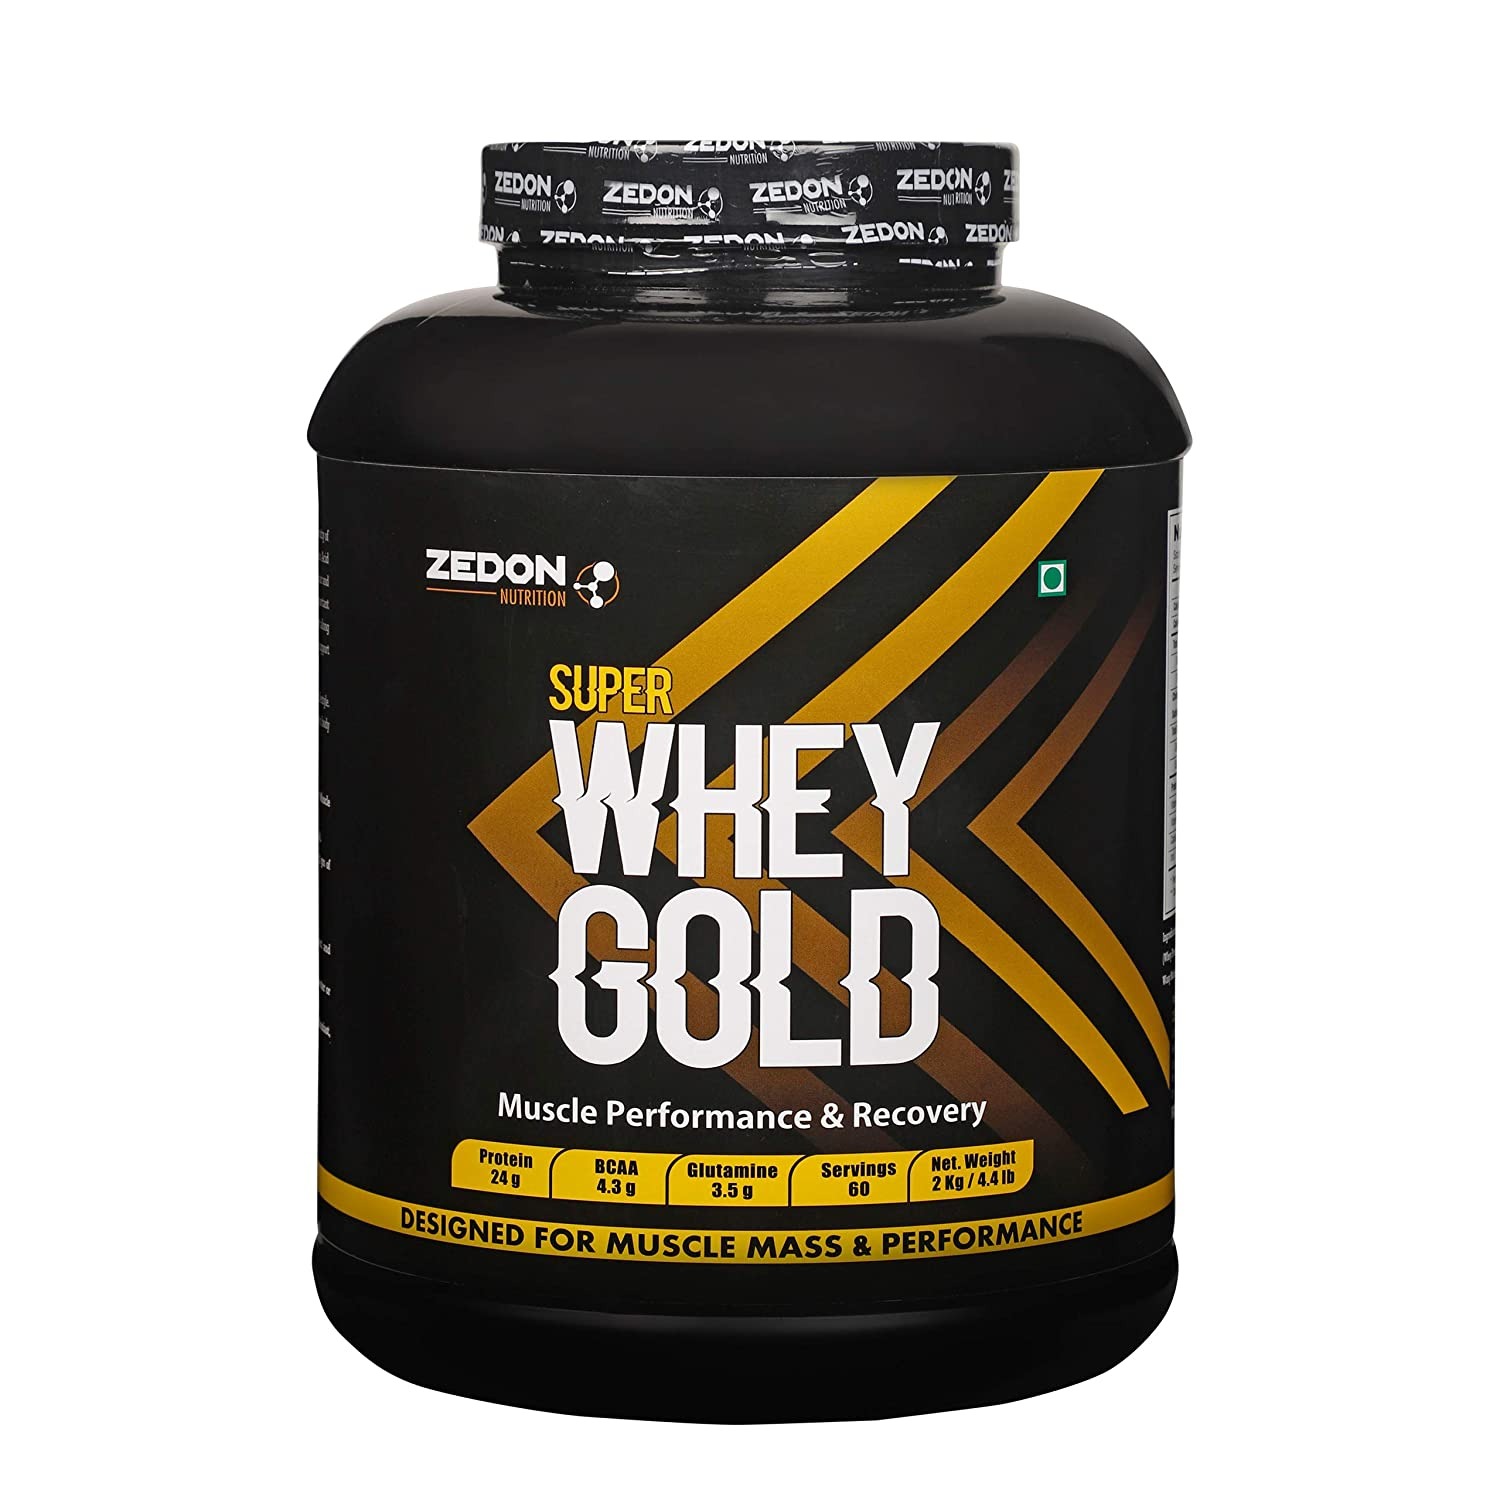 You are currently viewing Delicious and Chocolaty Zedon Whey Protein Powder